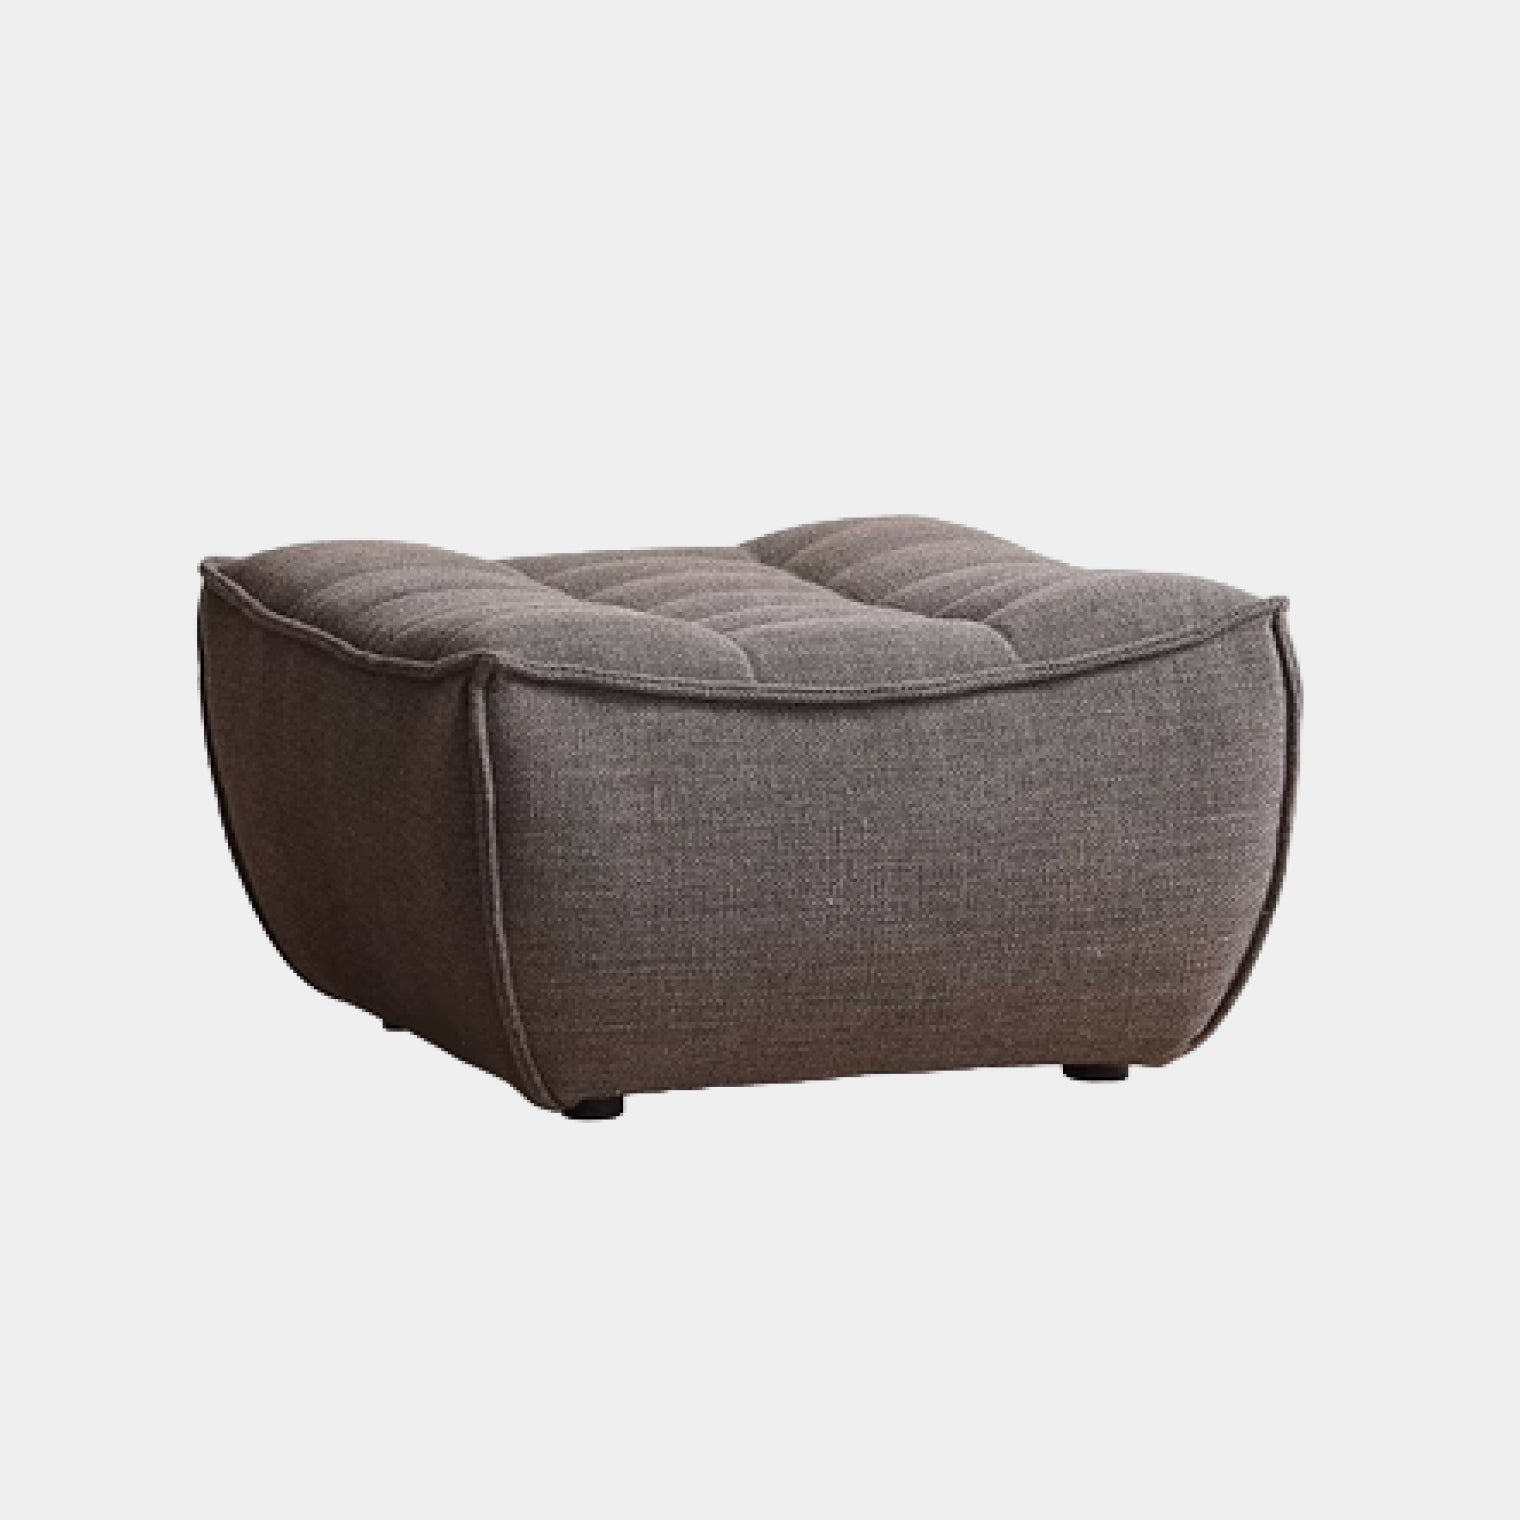 Amber Armless 2 Seater, Grey